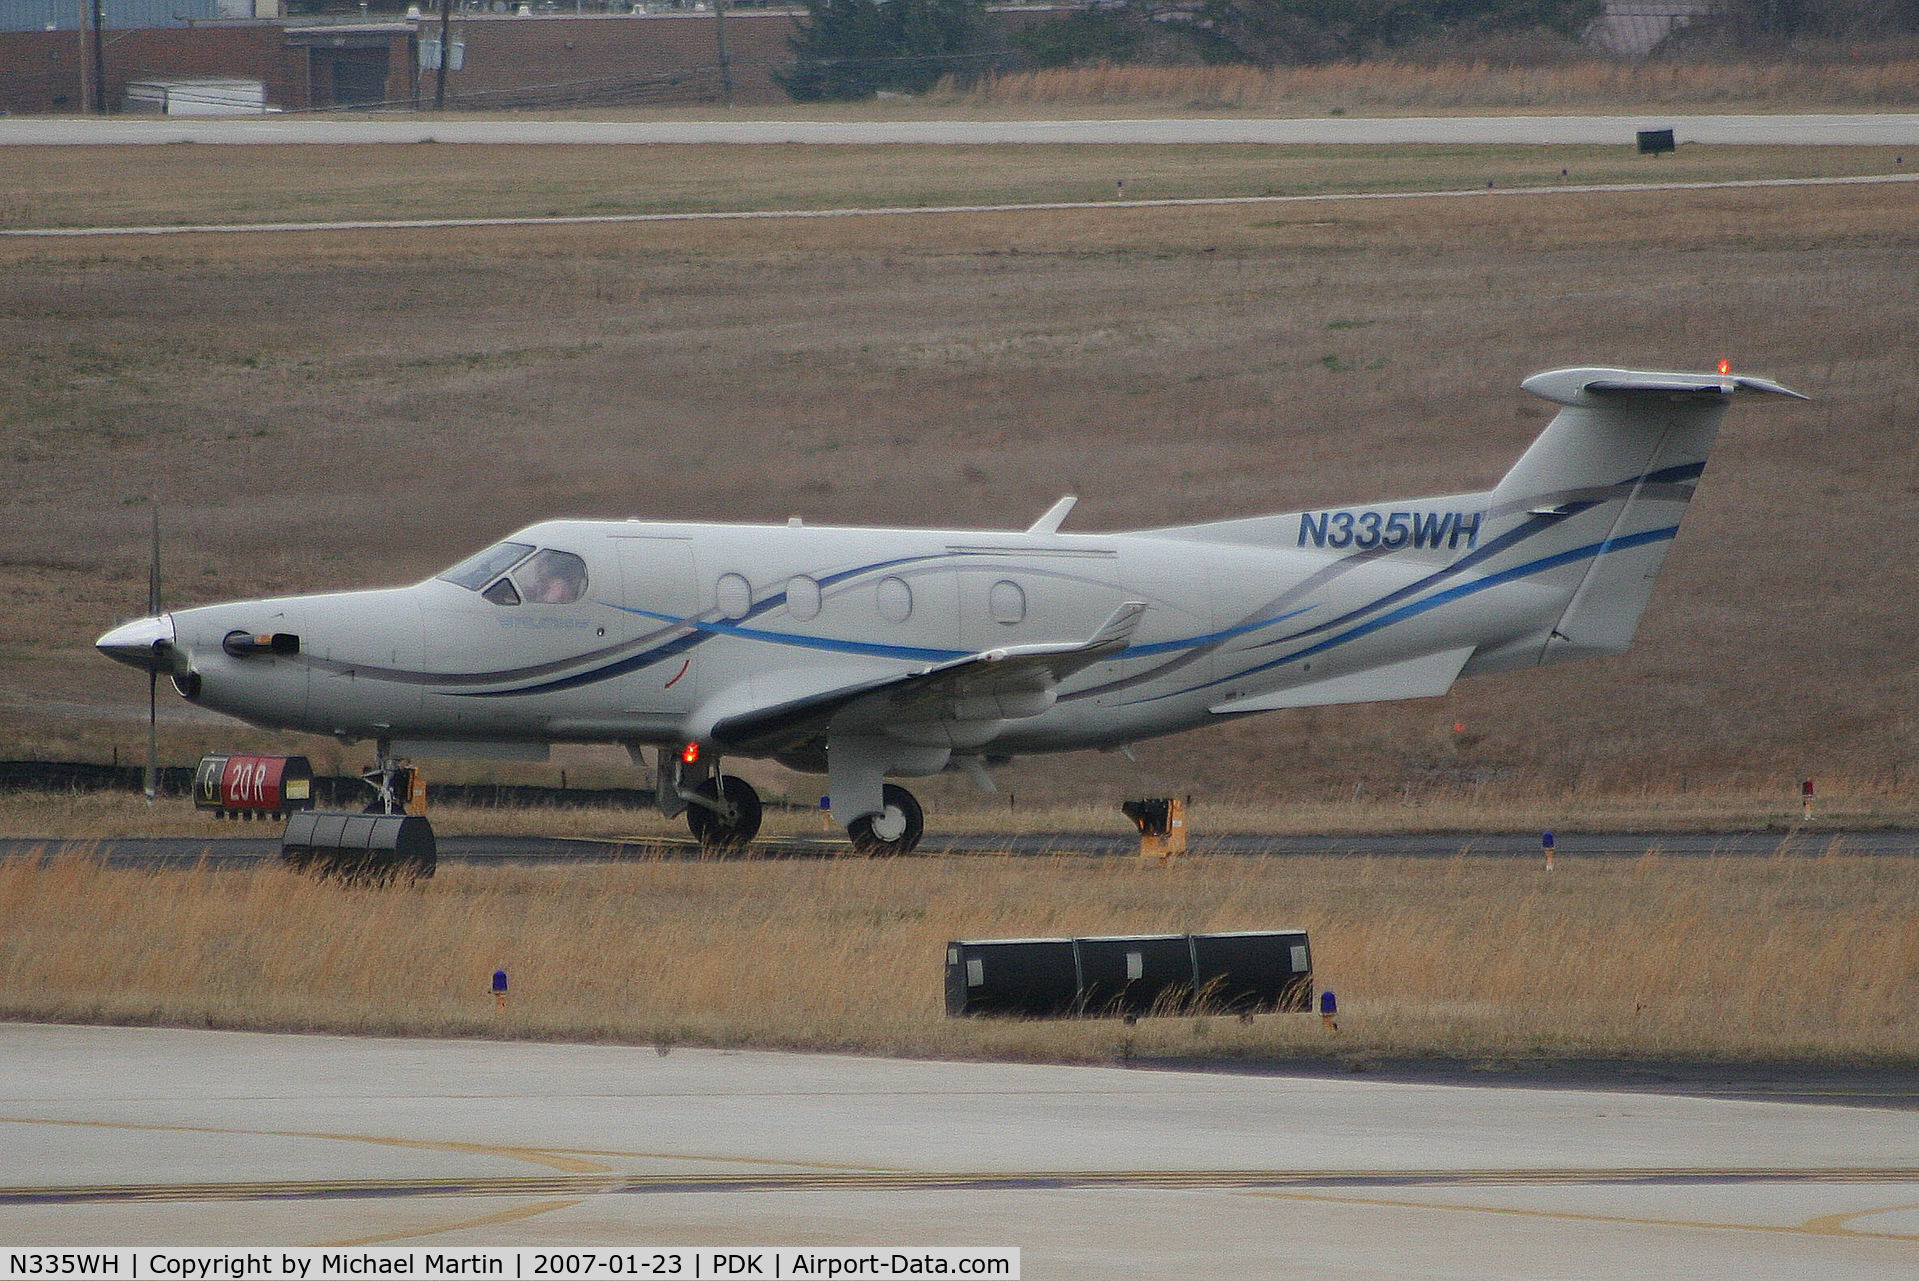 N335WH, 2000 Pilatus PC-12/45 C/N 335, Taxing to Epps Air Service